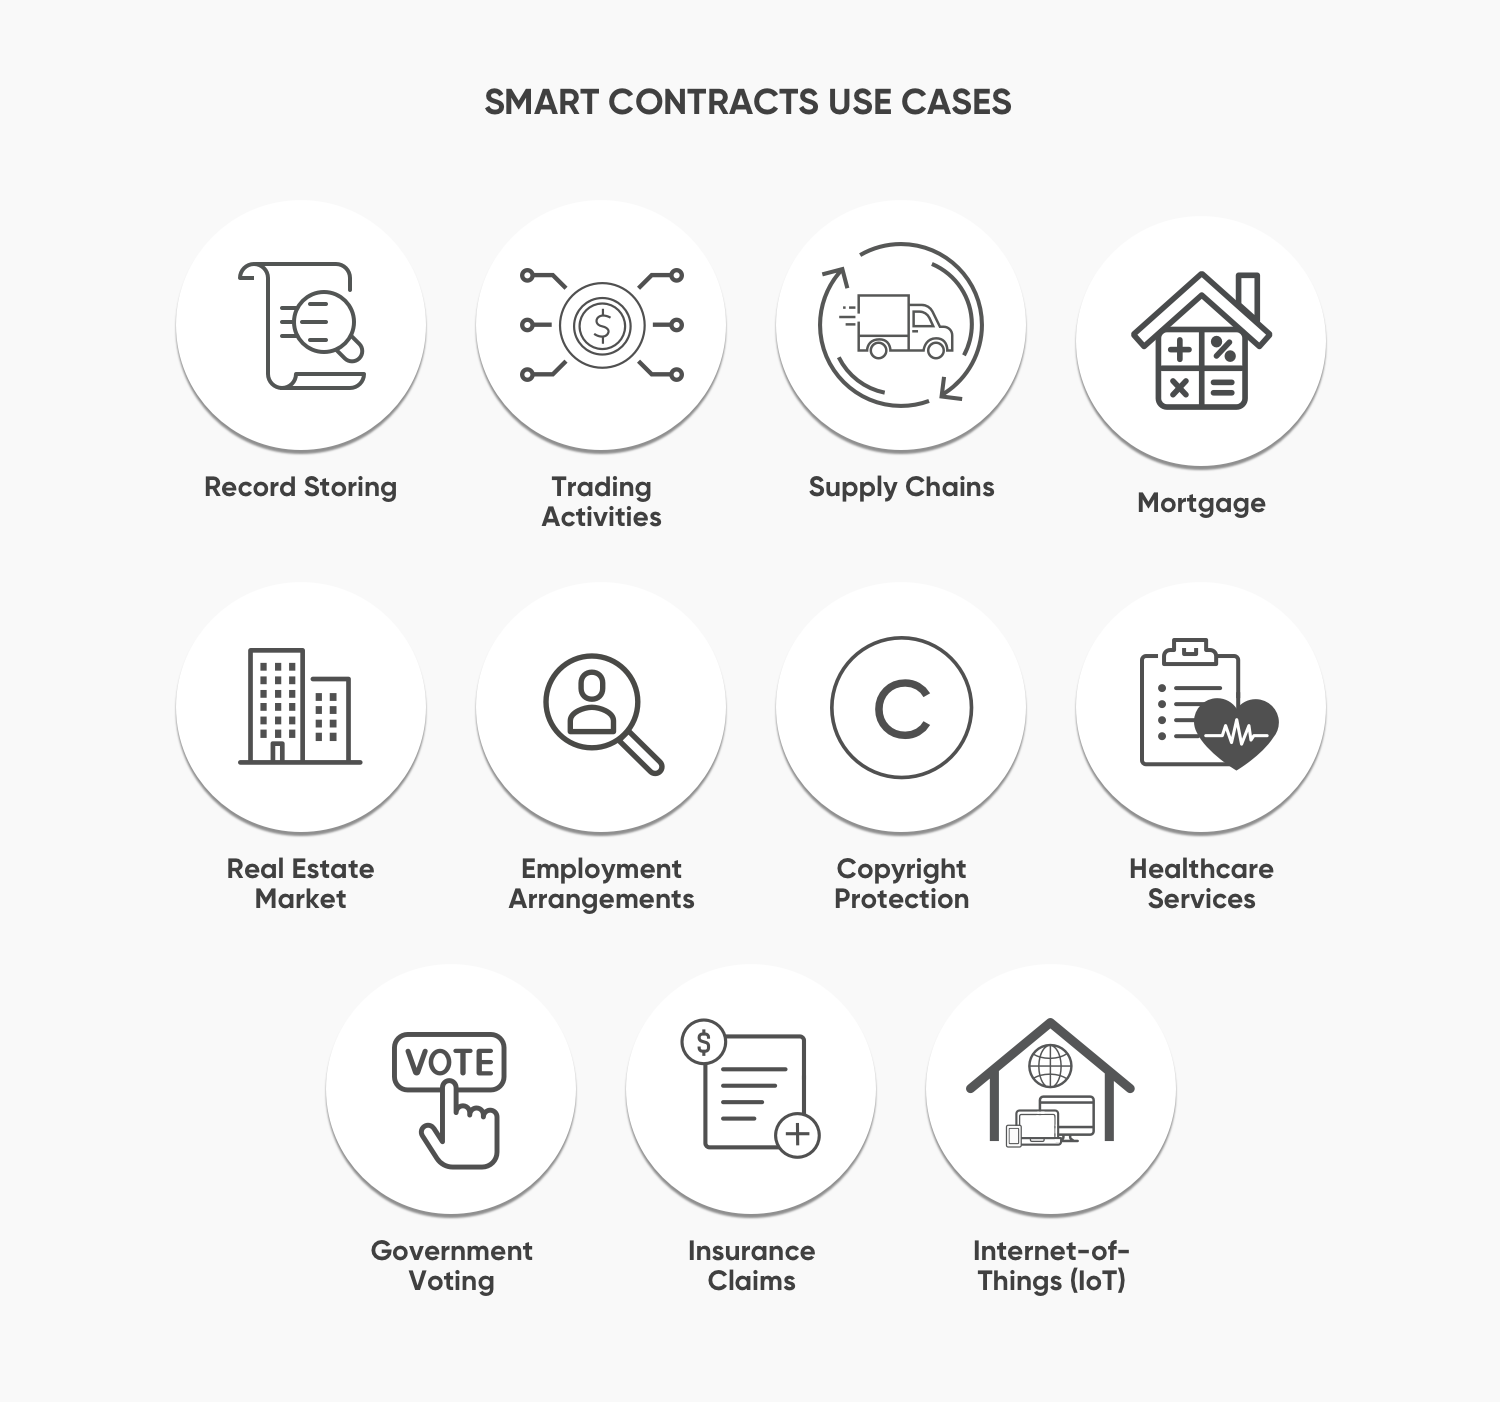 Smart contracts use cases